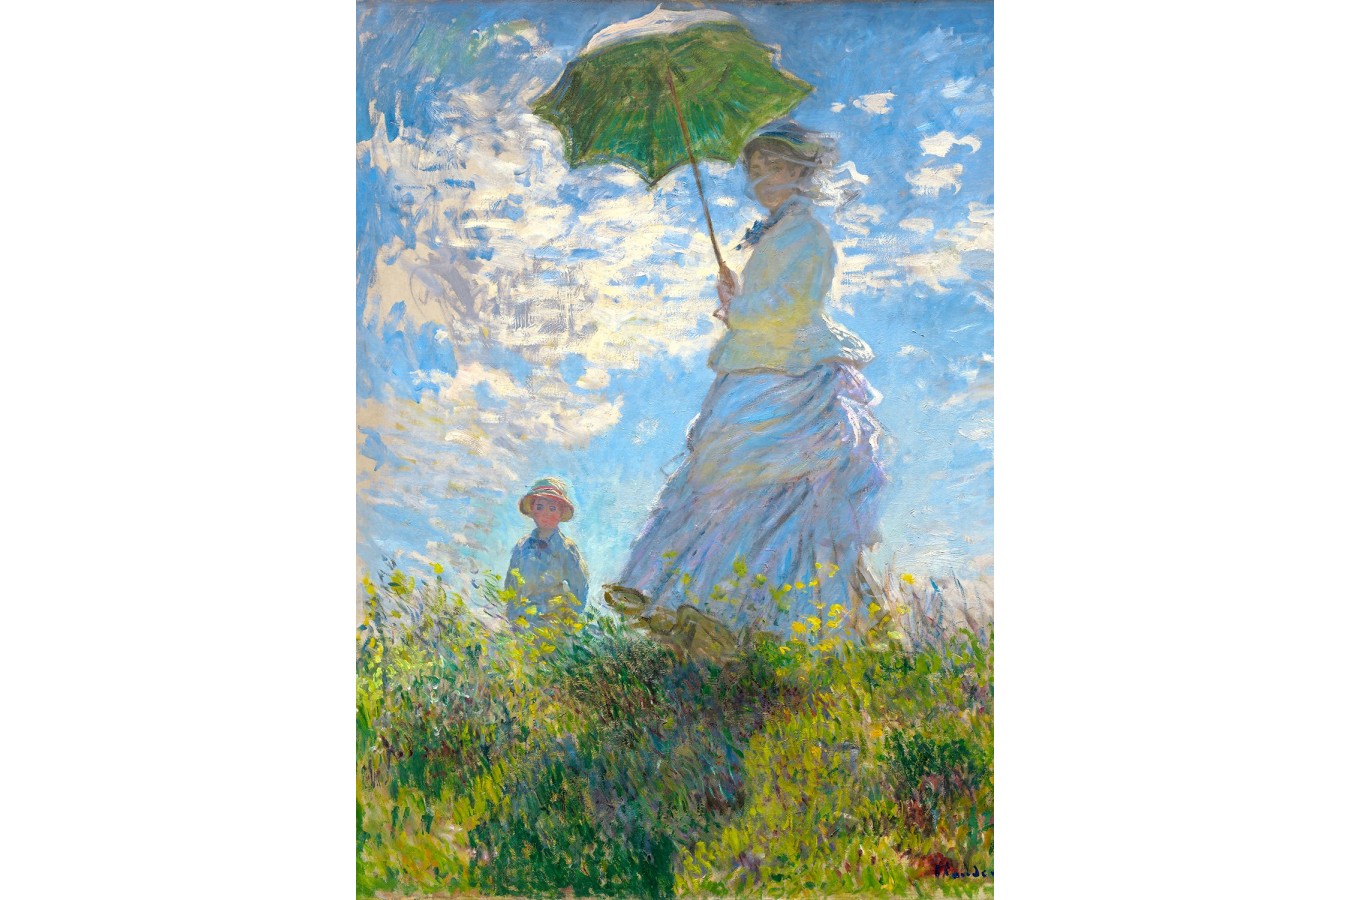 Puzzle 1000 piese - Claude Monet: Woman with a Parasol (Madame Monet and Her Son) (Enjoy-1215)